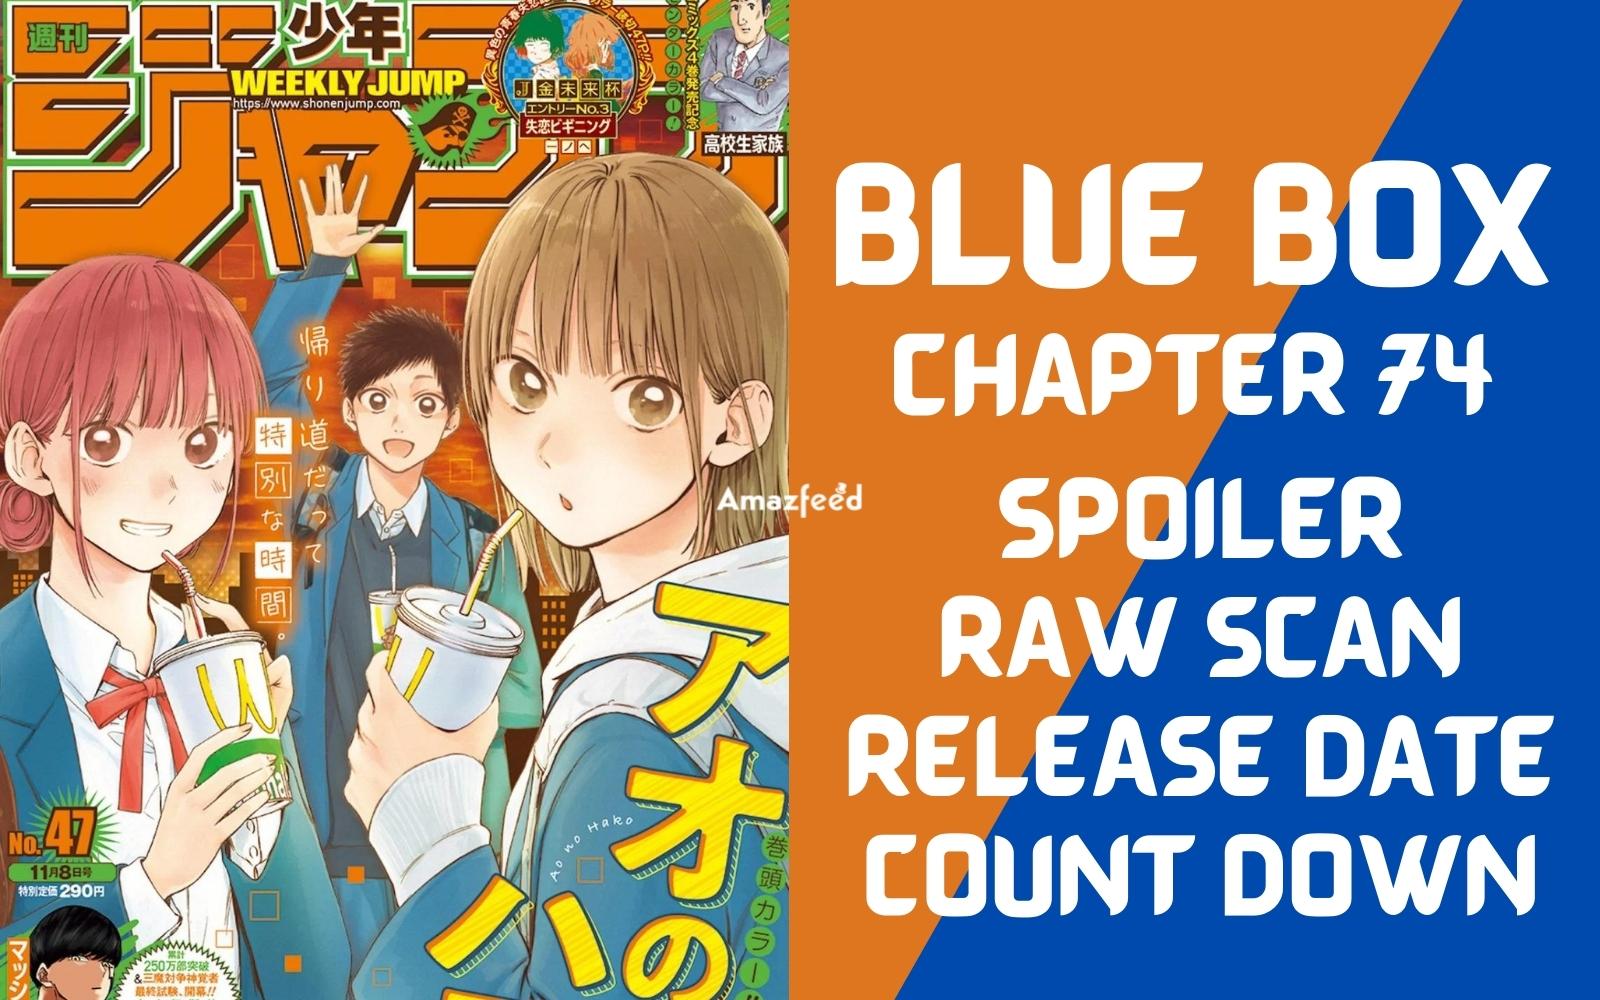 Blue Lock Episode 23  Release Date, Spoiler, Recap, Trailer, Characters,  Countdown, Where to Watch? & More » Amazfeed